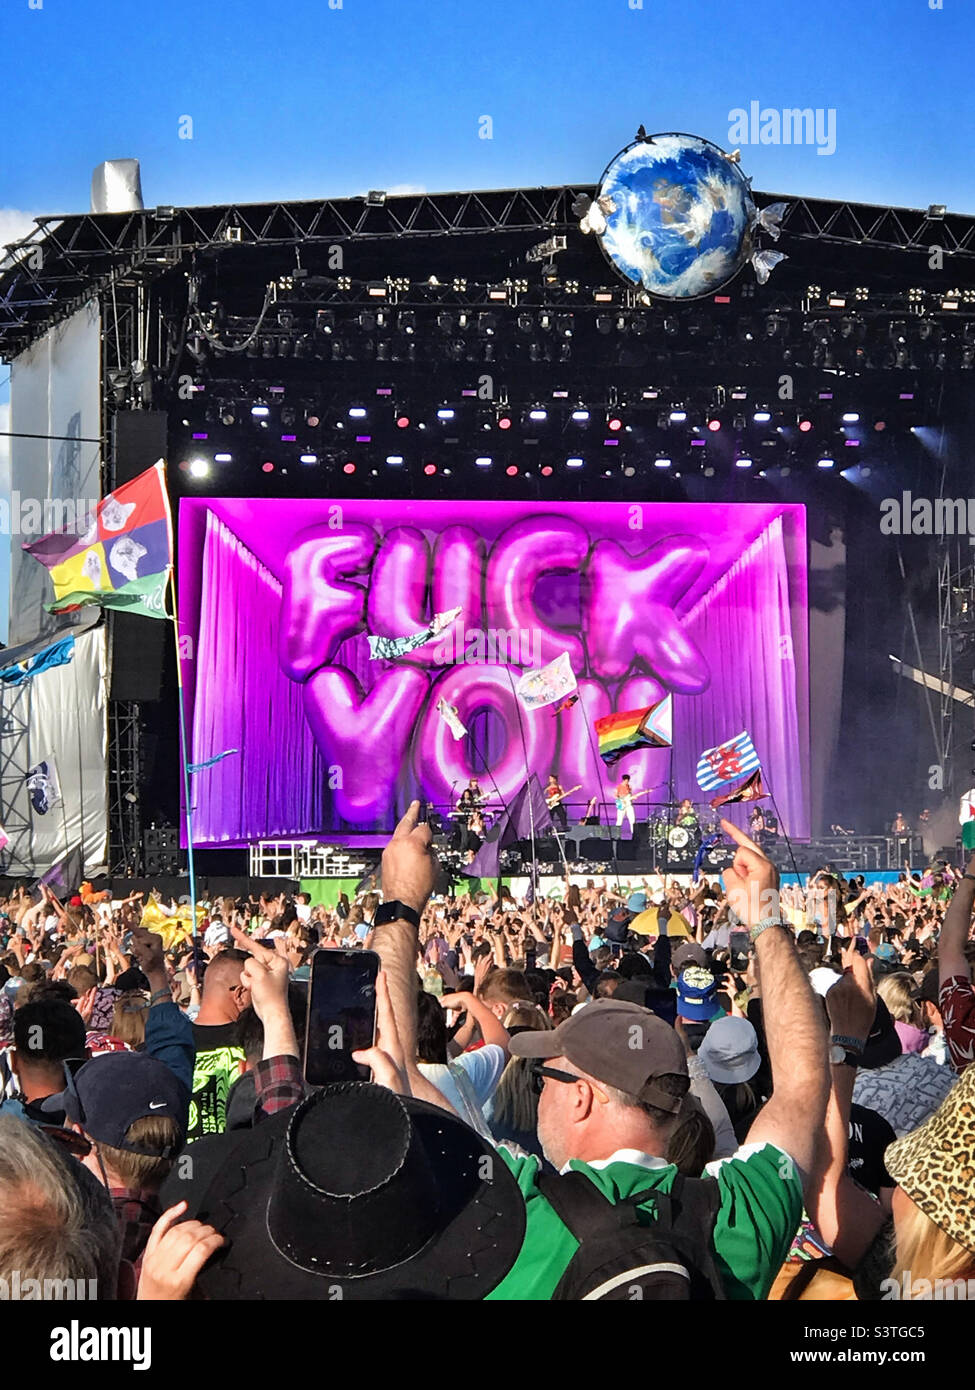 The “Fuck You” sign displayed on stage during the performance of Olivia Rodrigo & Lily Allen at the Glastonbury Festival 2022 as a response to the US Supreme Court judgement in the Wade vs Roe debate. Stock Photo